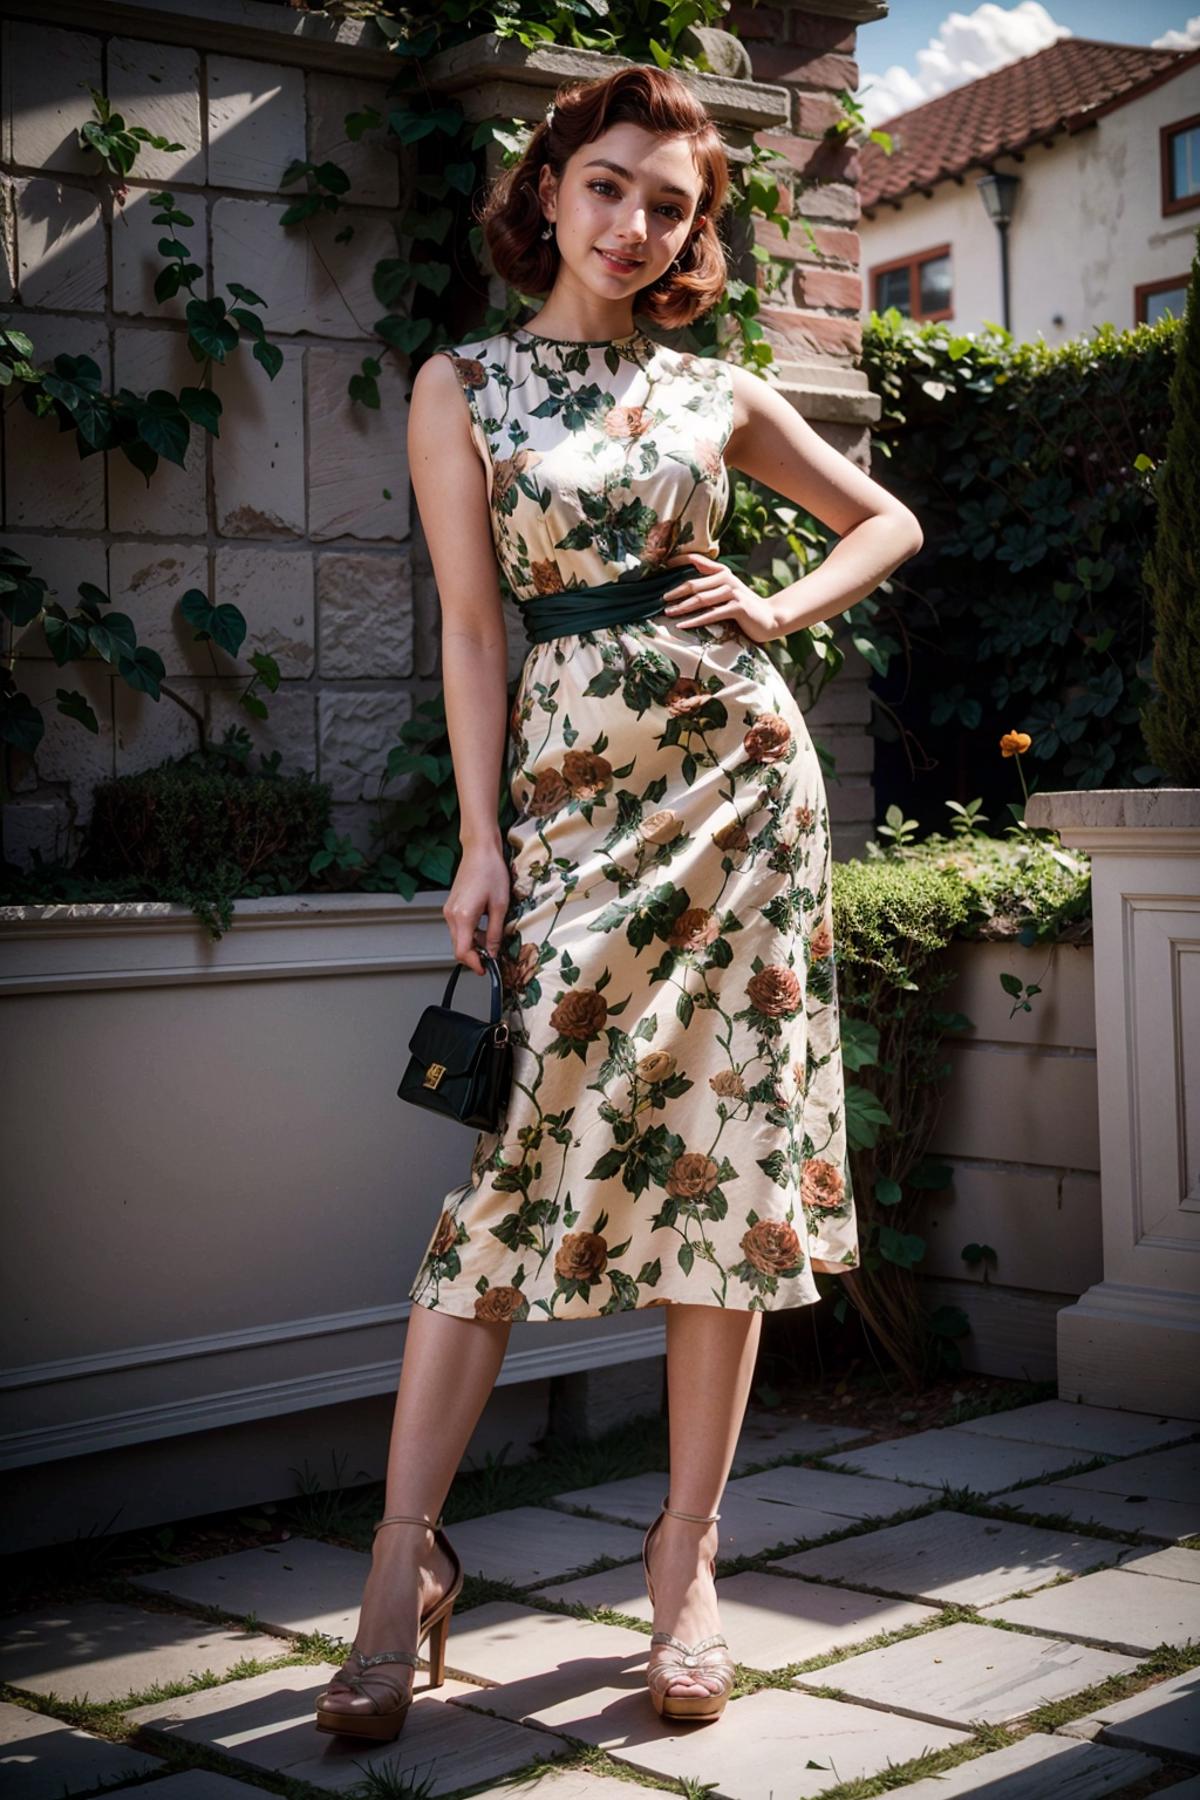 Retro Floral Dress image by feetie